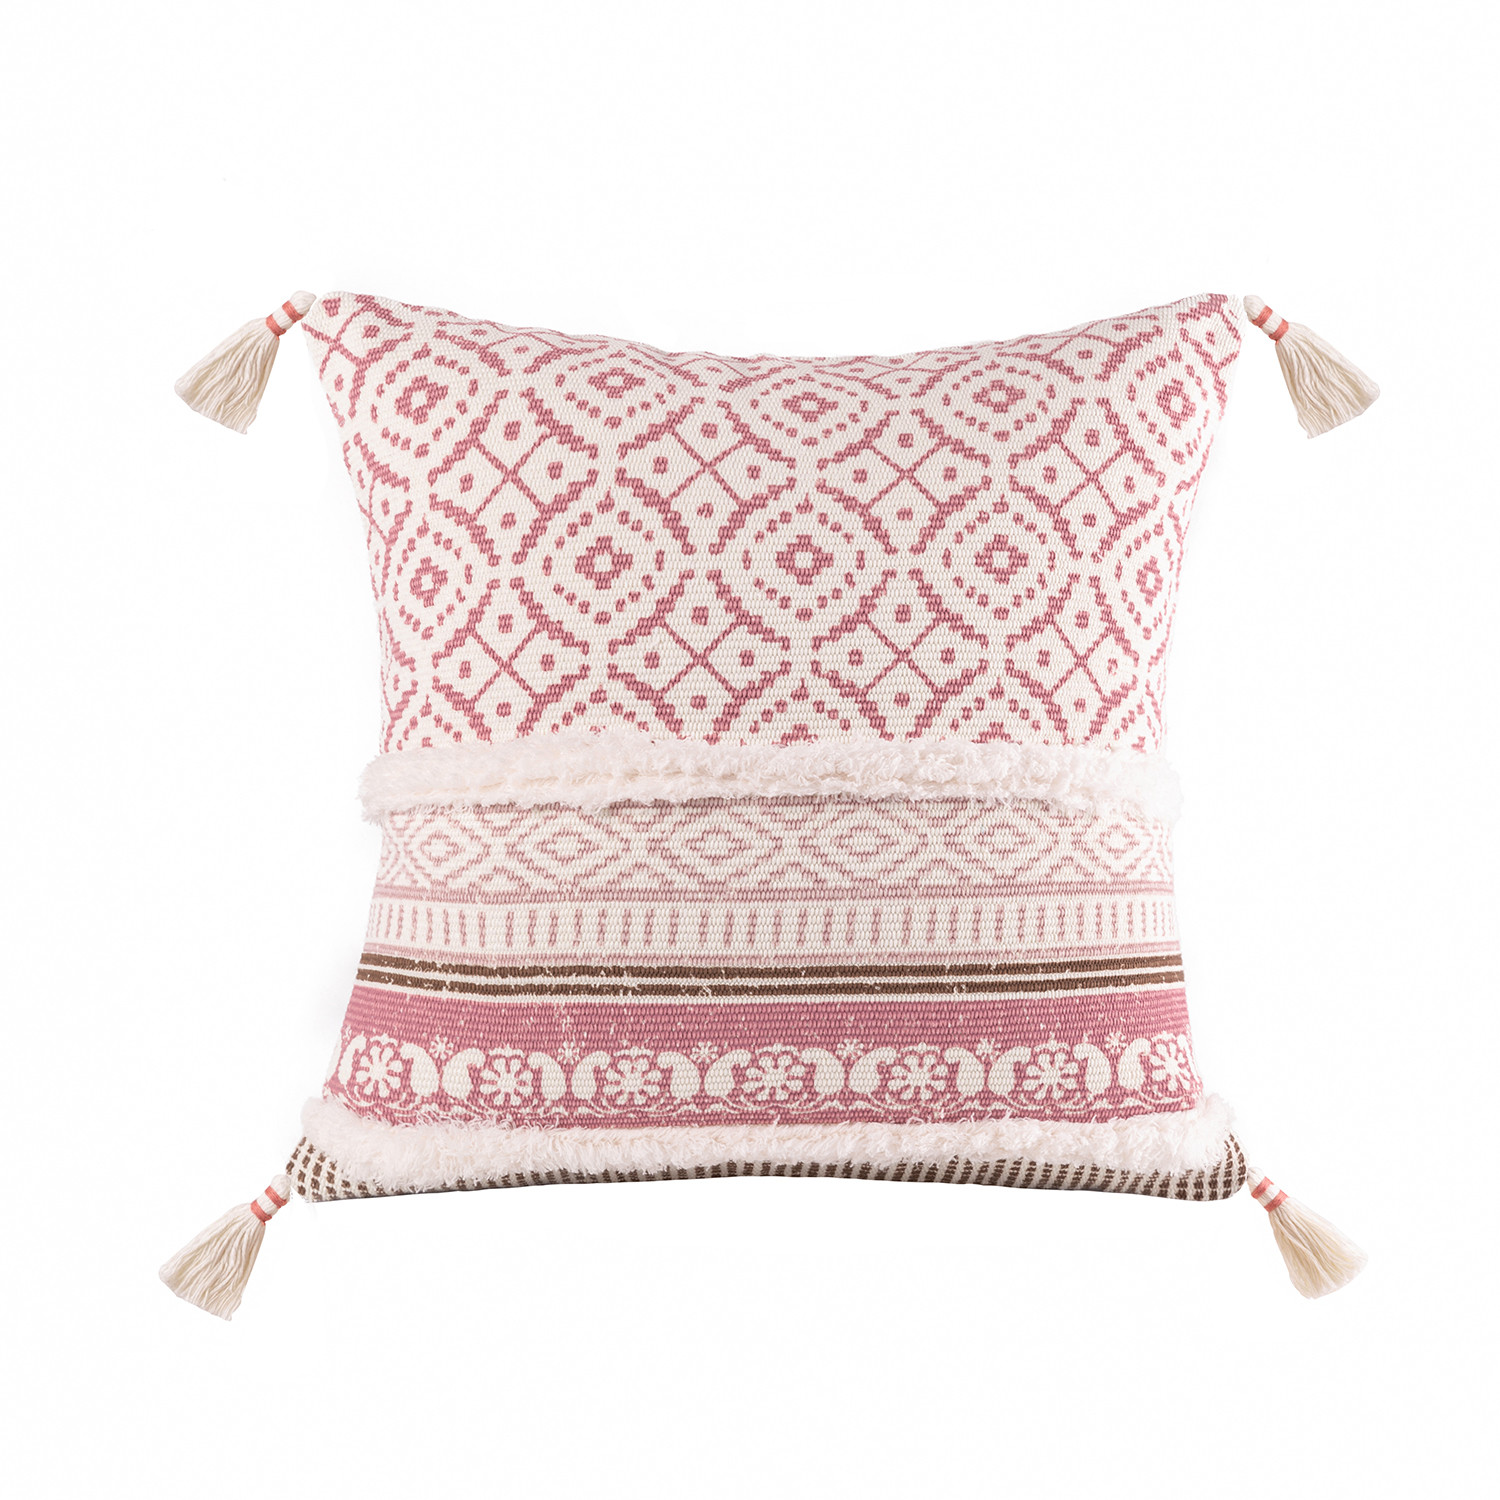 18x18 Inch Pair Hand Block Print Pillow Cover, White & Baby Pink